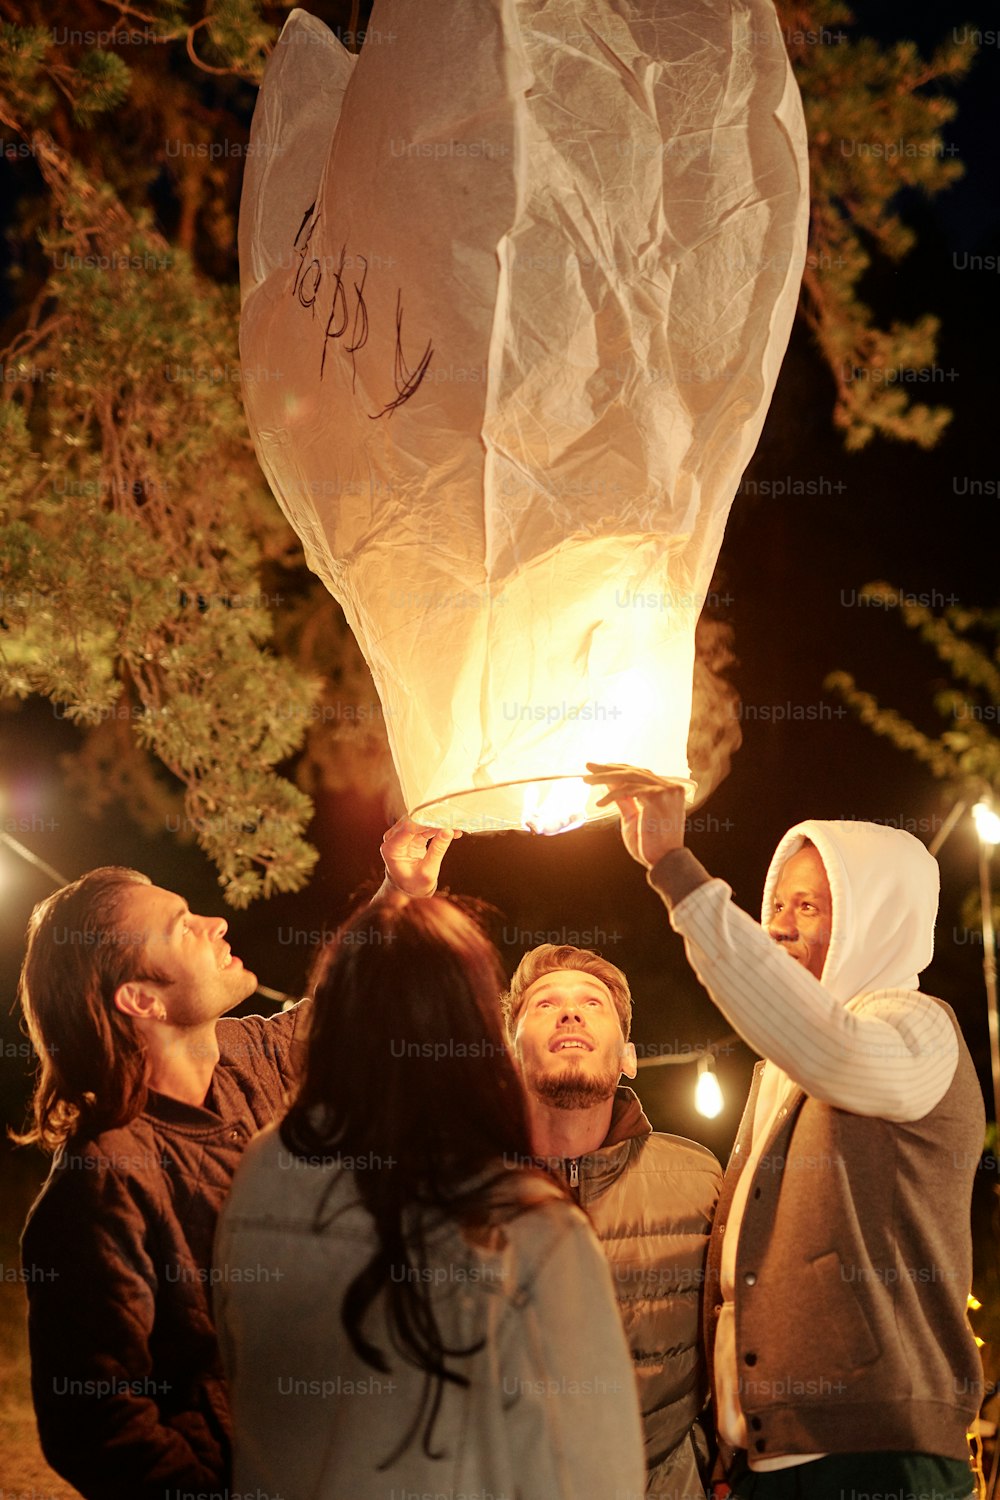 Intercultural young friends in casualwear holding and looking into large illuminated balloon at night gathering under pine tree